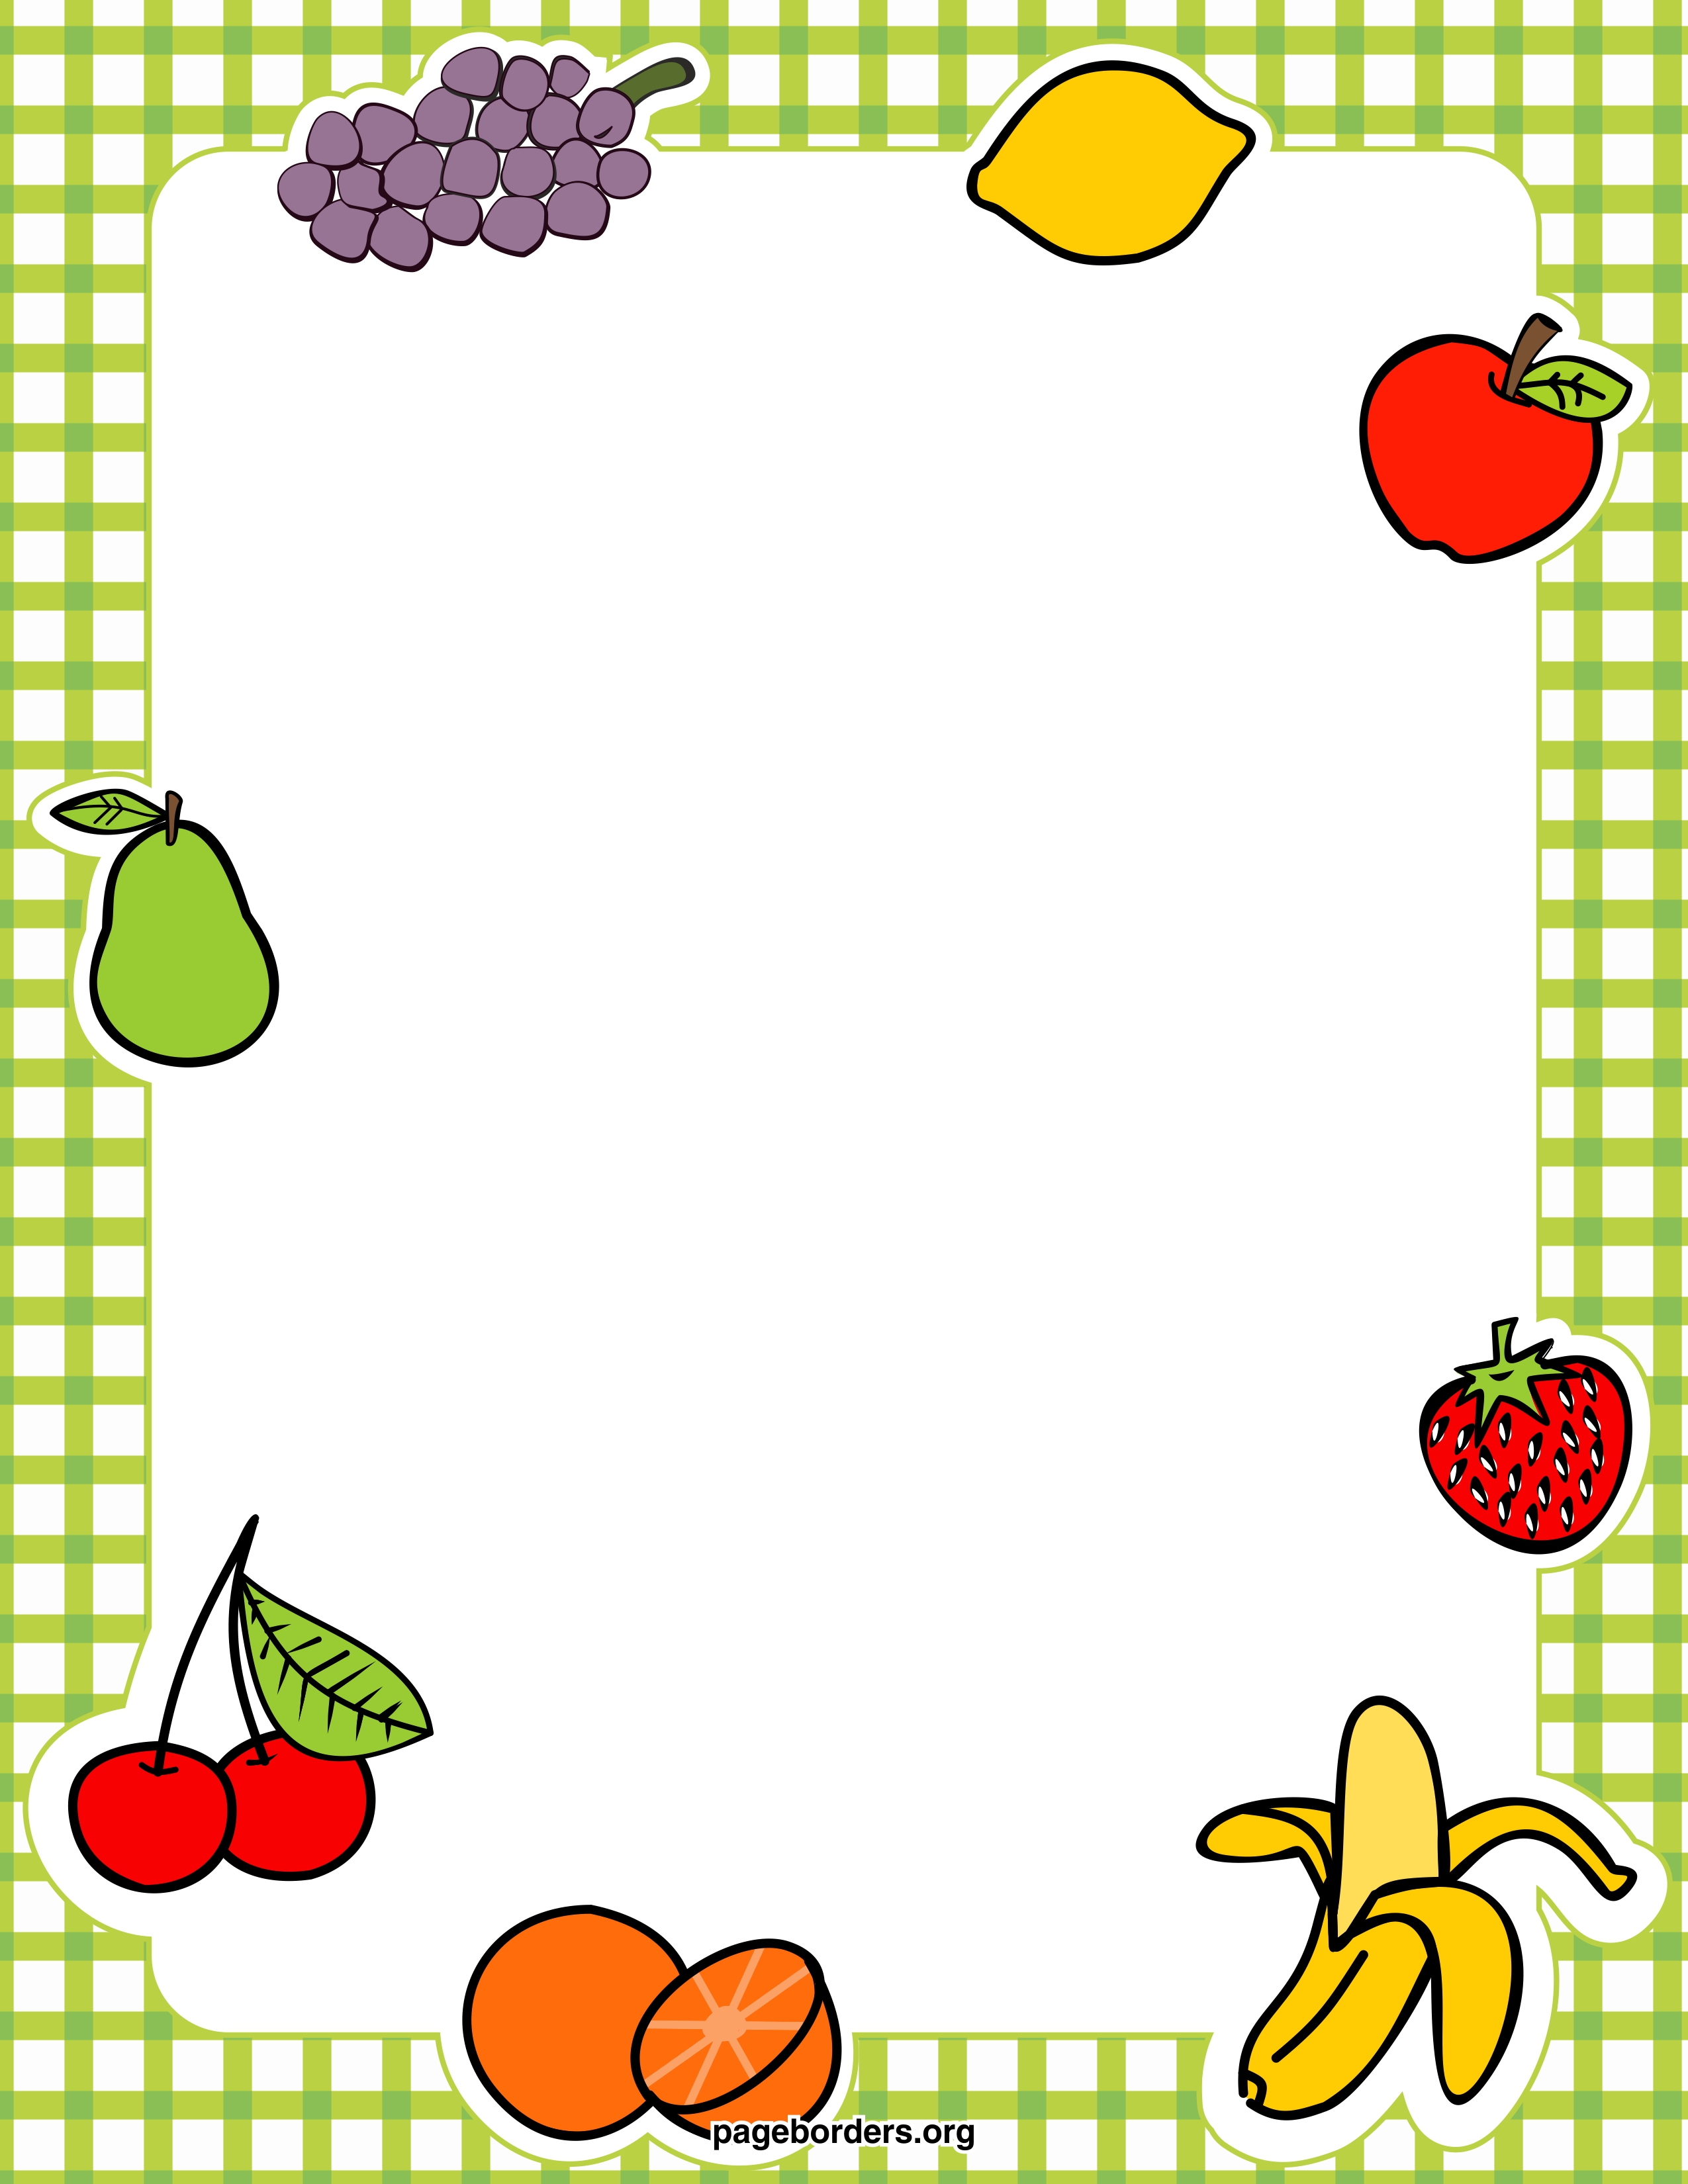 College free food clipart 